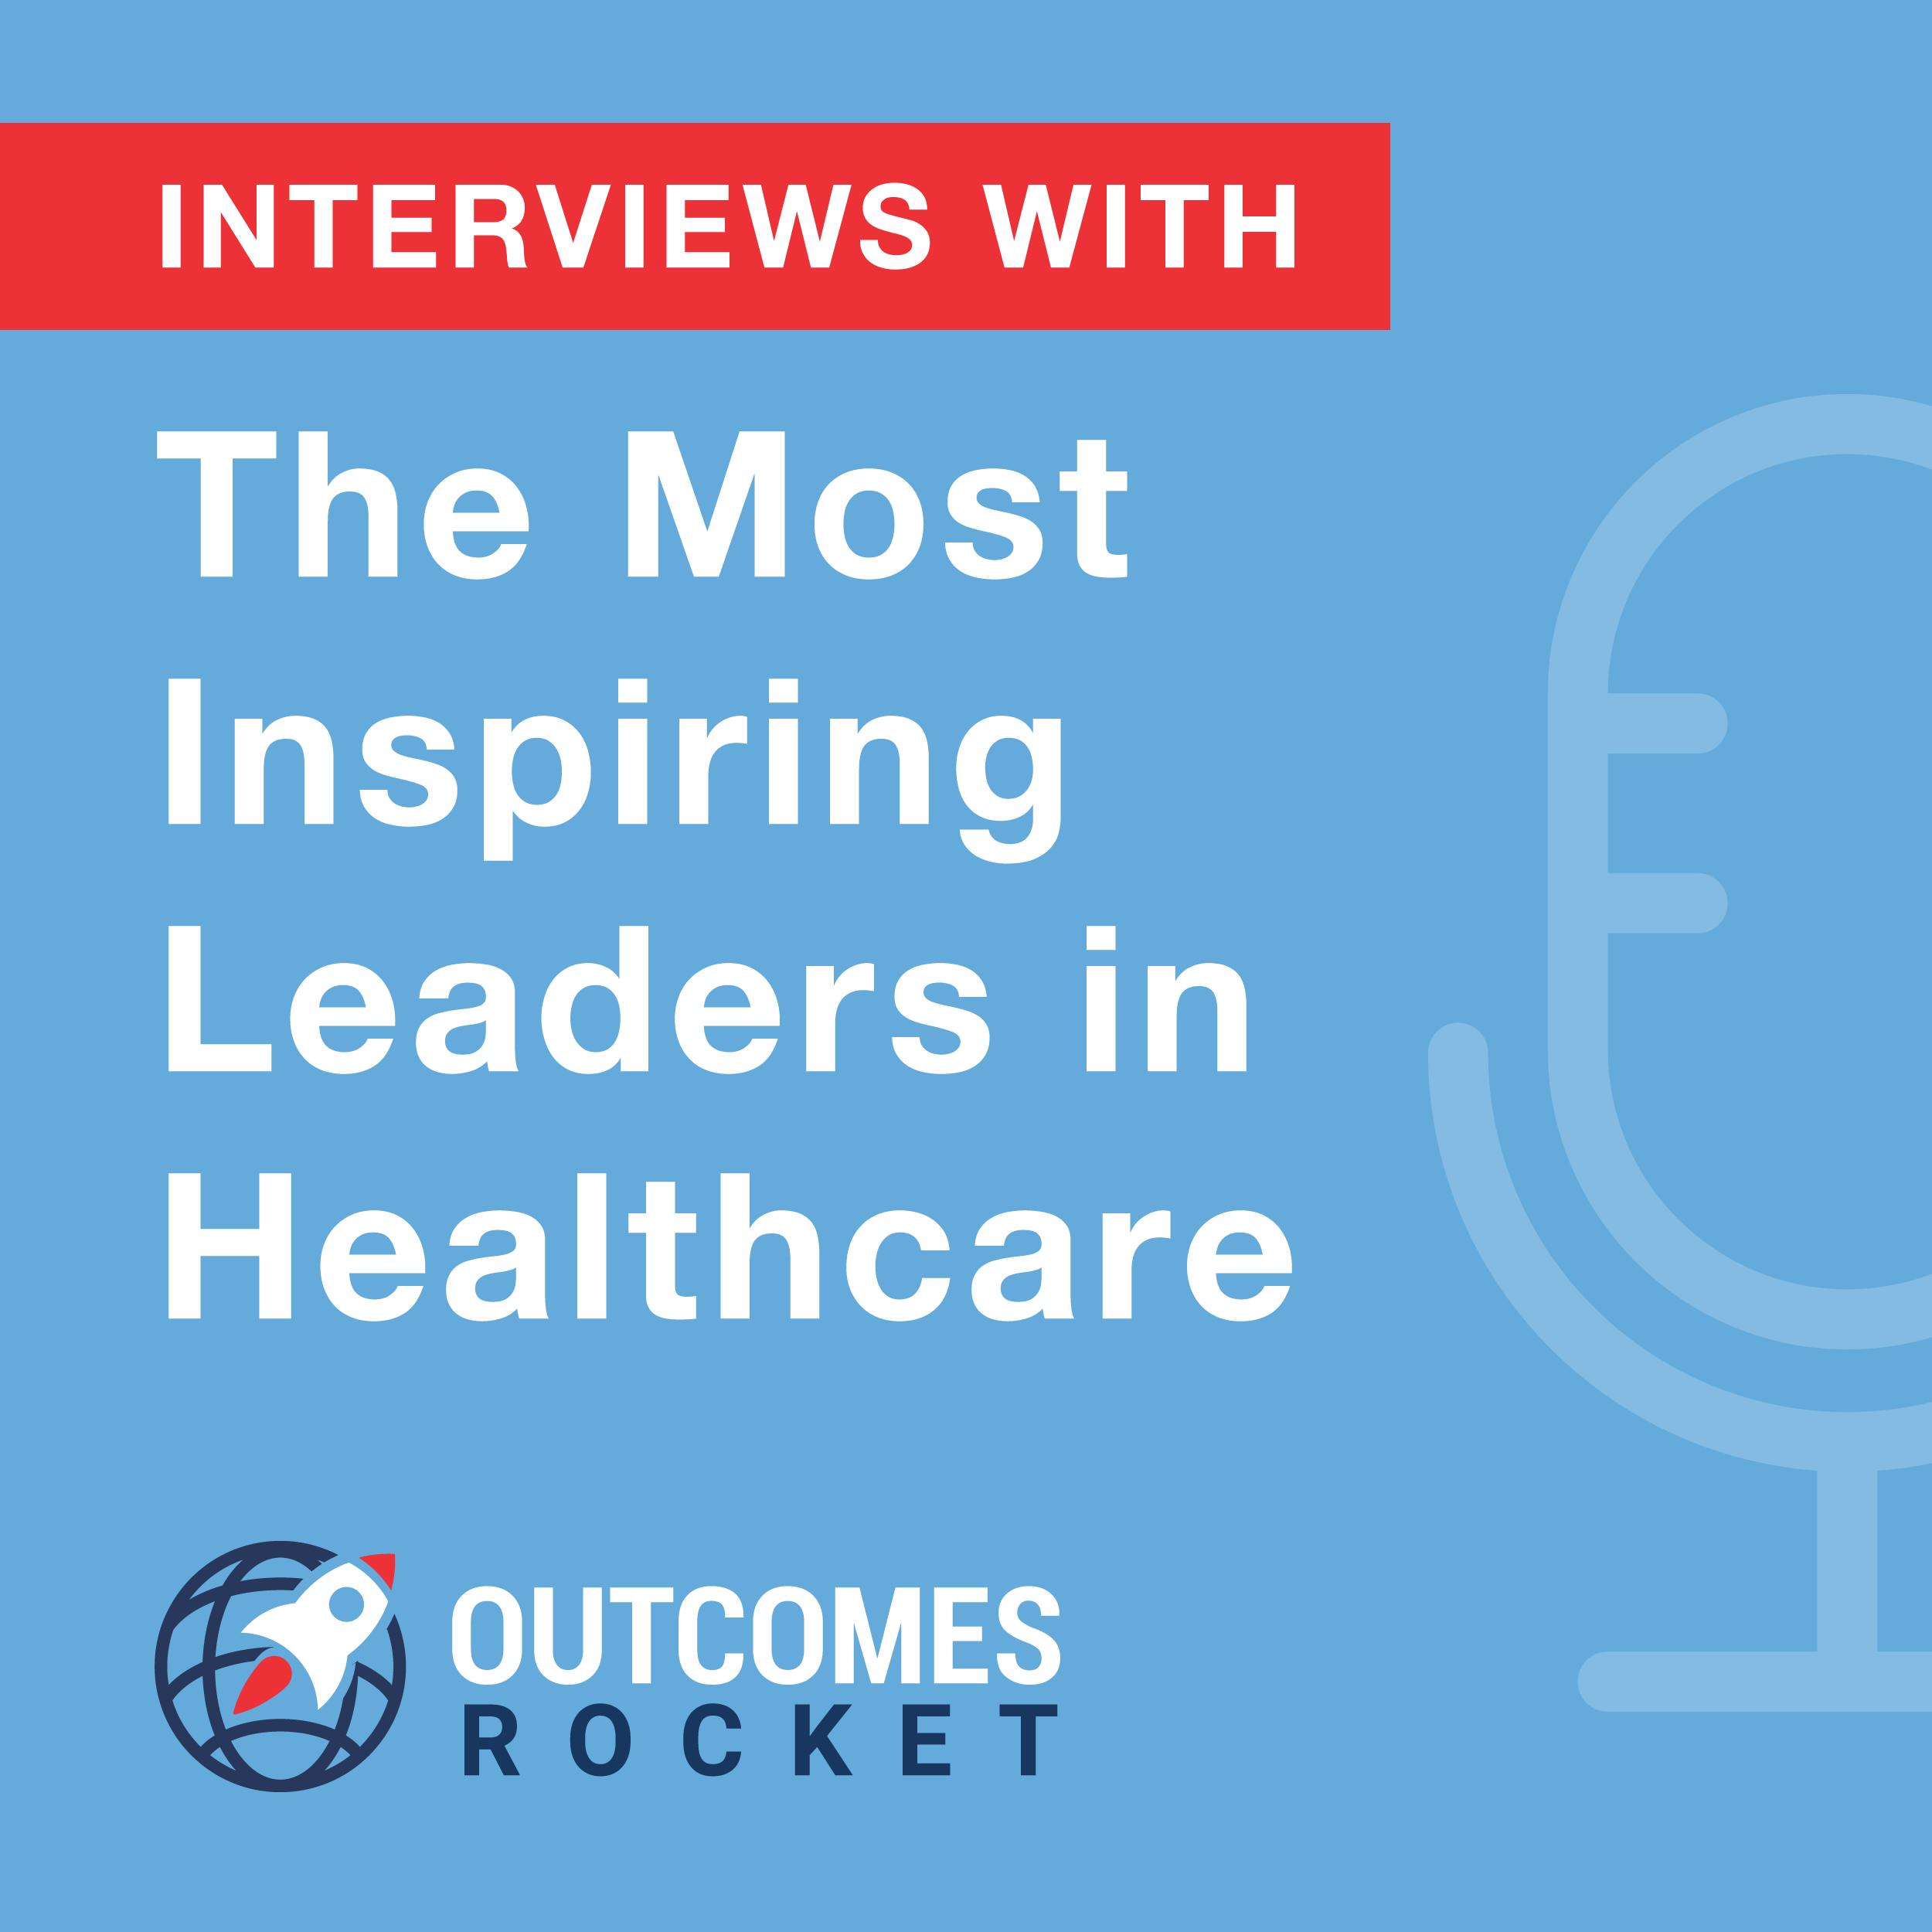 How Today’s Leaders Can Better Understand Today’s Millenial Mindset in Healthcare with Emma Goodman, Director of Key Accounts and Webinars at Becker’s Healthcare